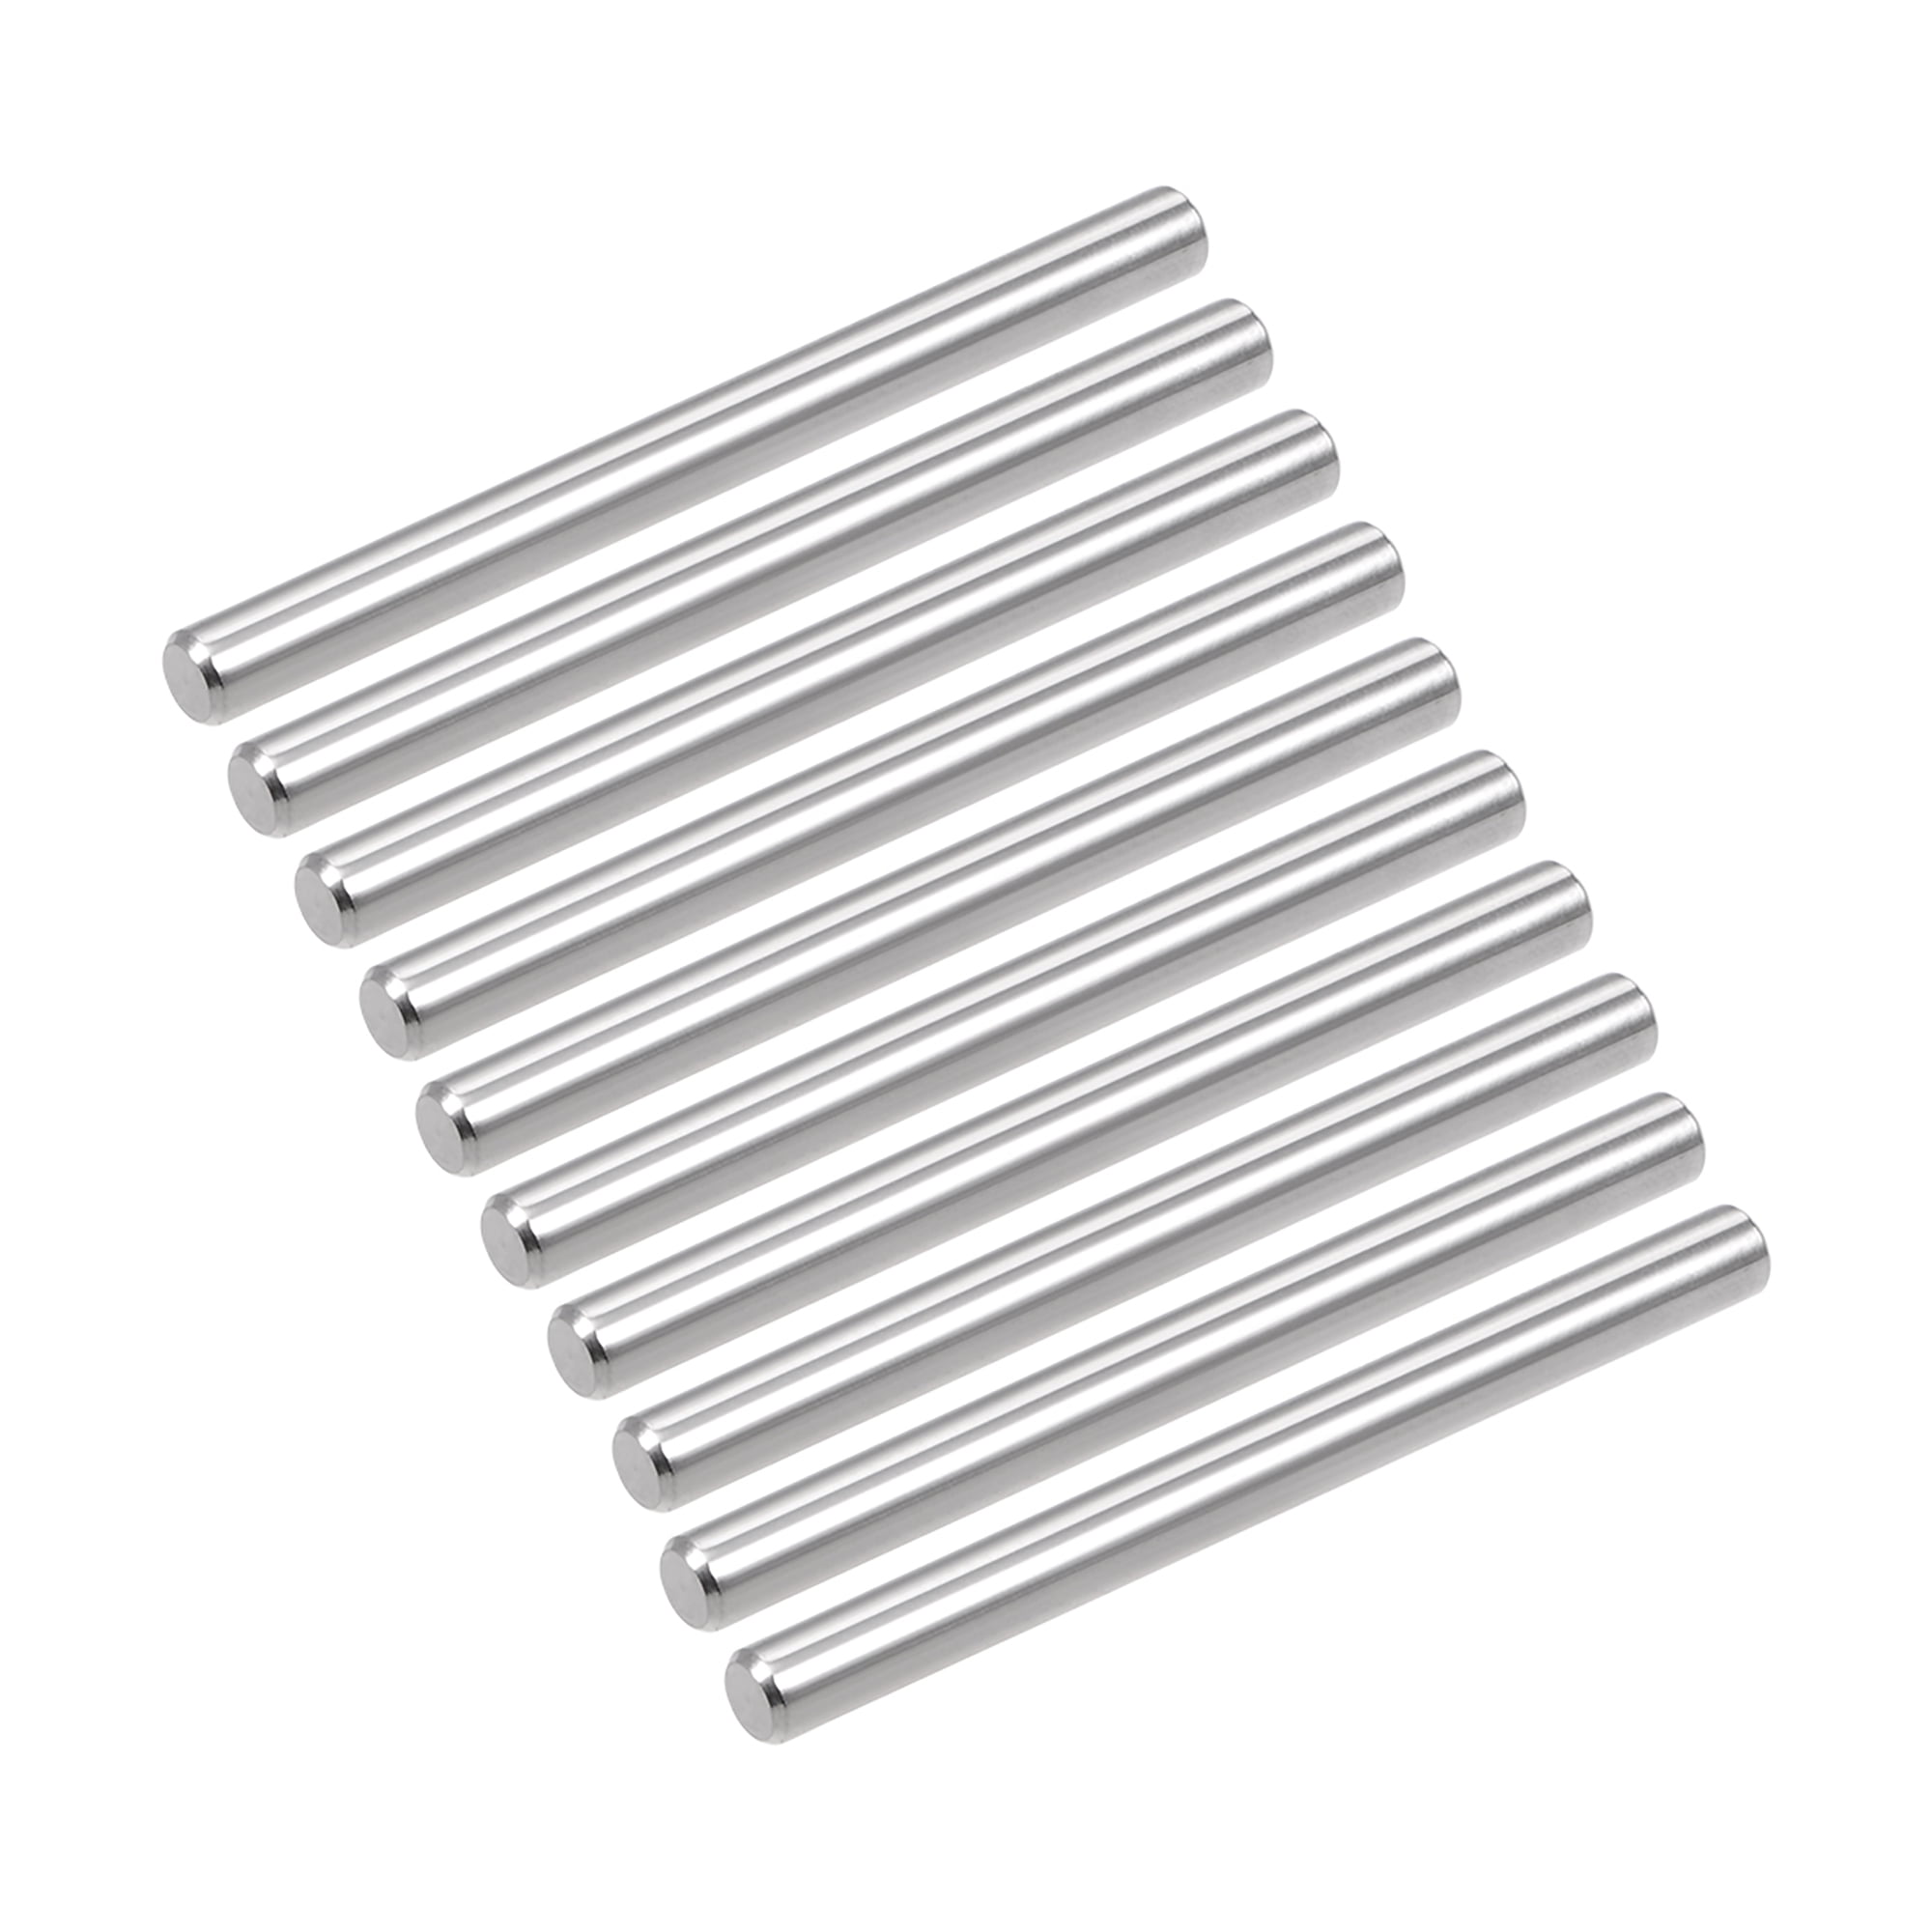 18-8 Stainless Steel Dowel Pins 5/32" Dia x 3/8" Length 50 Pieces 